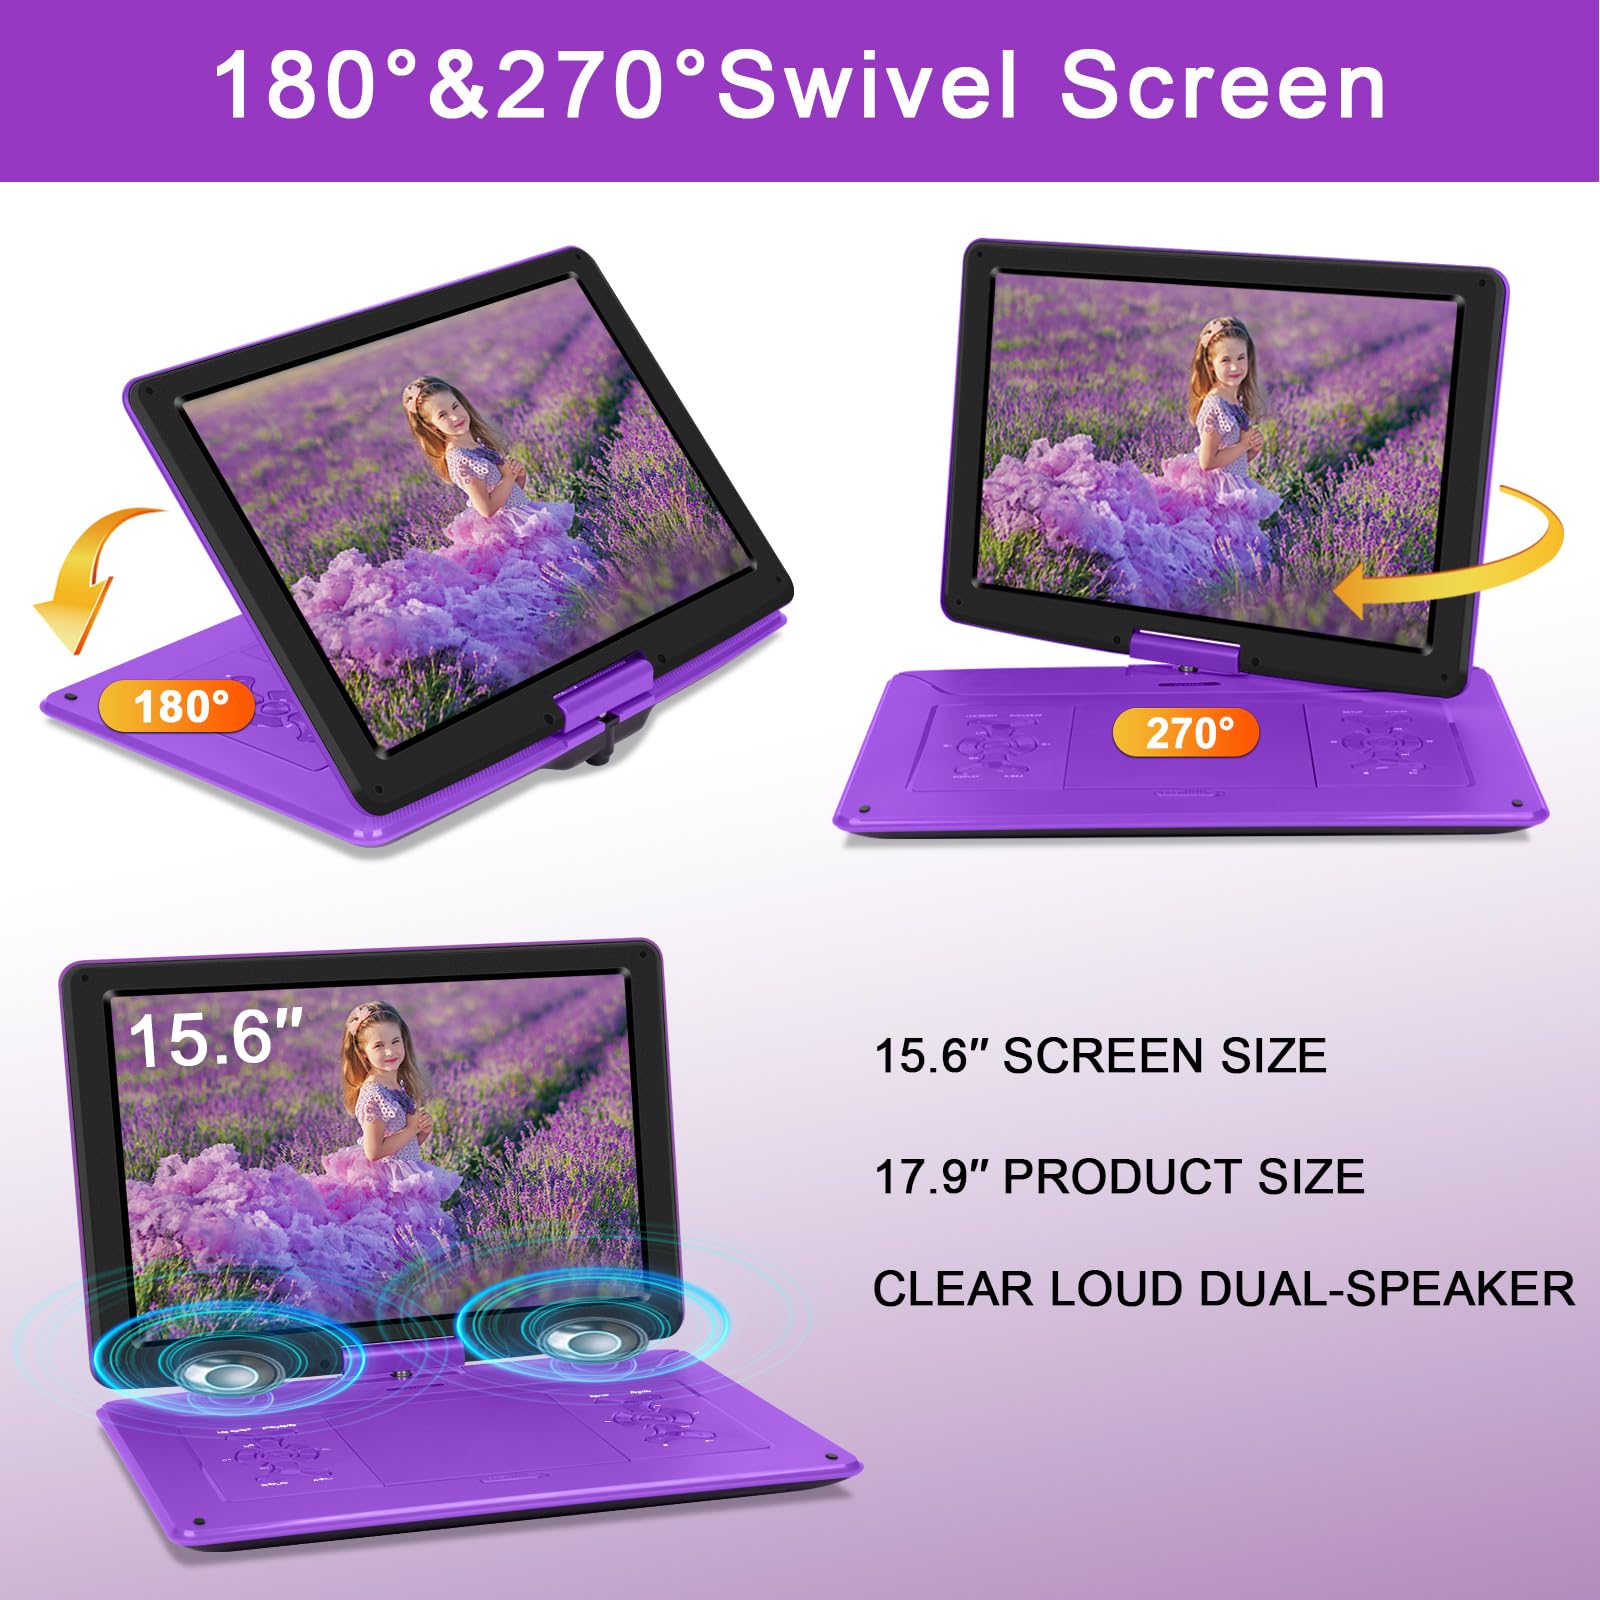 𝒀𝑶𝑶𝑯𝑶𝑶 17.9'' Portable DVD Player with 15.6" Large Swivel Screen, 6 Hours Battery DVD Player Portable with Car Charger and AC Adapter, Support USB/SD Card/Sync TV, Region Free, Purple